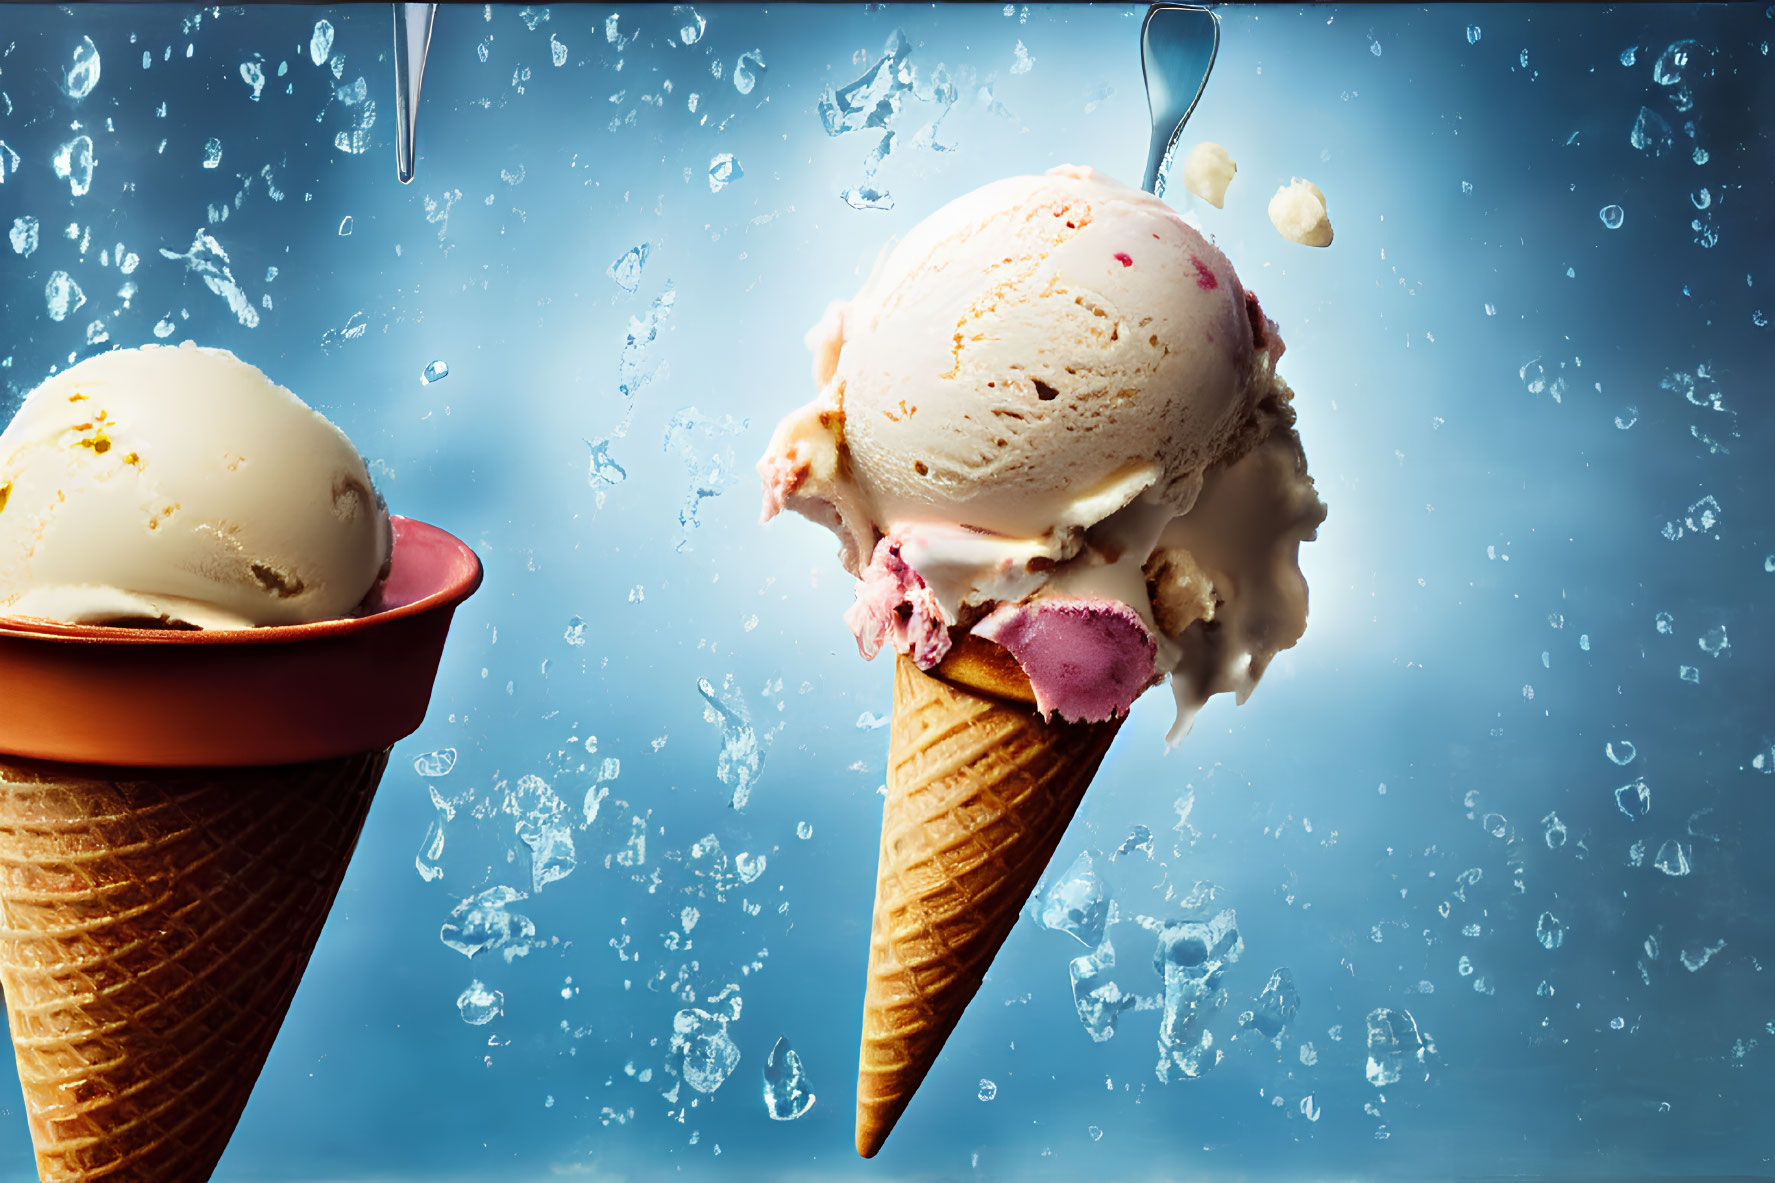 Melting ice cream cones on blue background with water droplets.